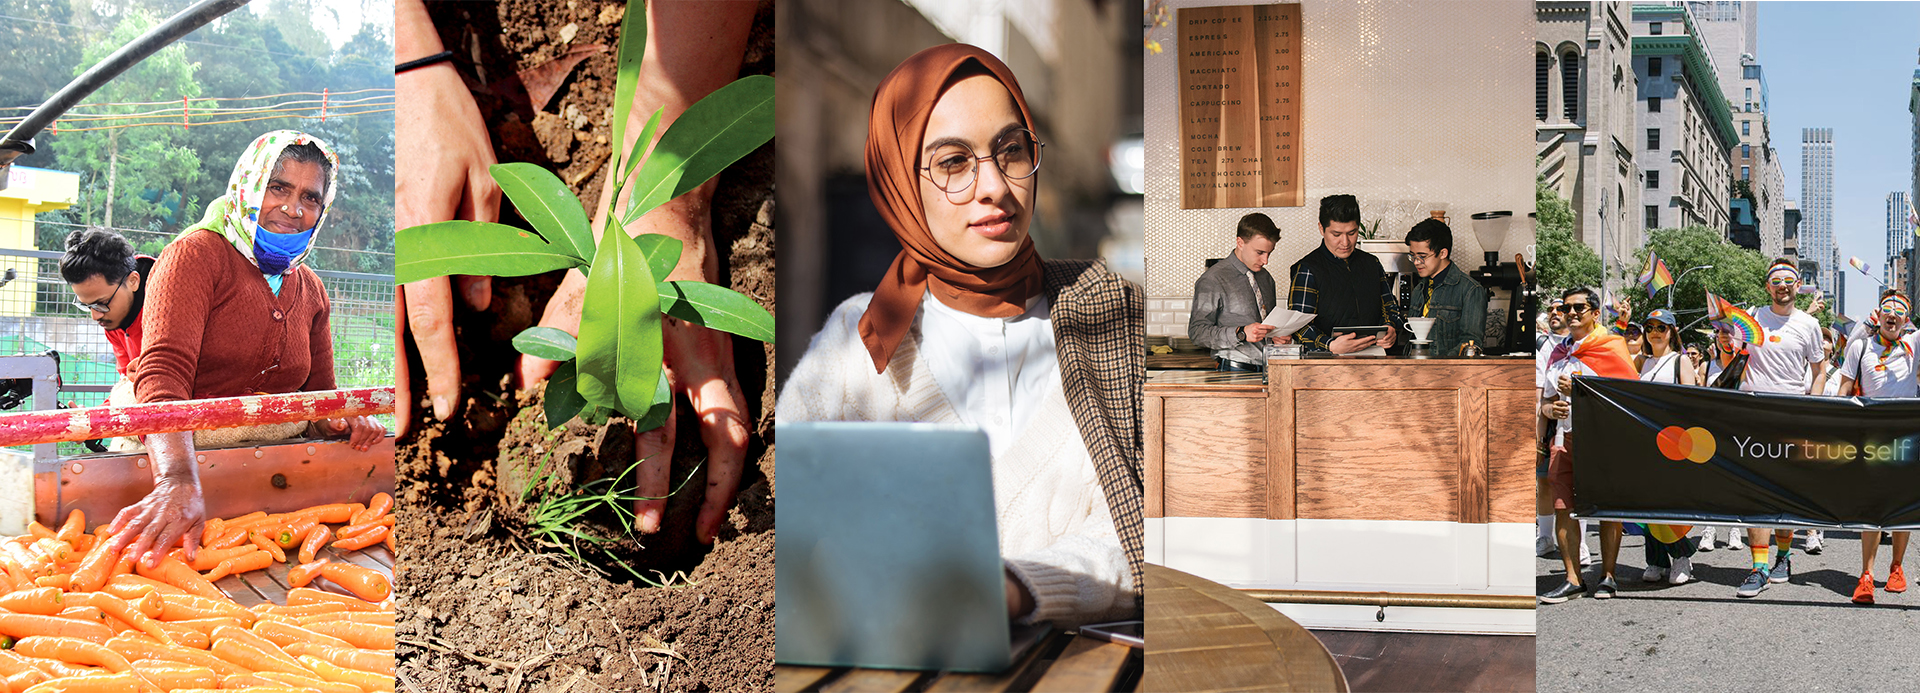 Collage of images representing Mastercard's ESG initiatives